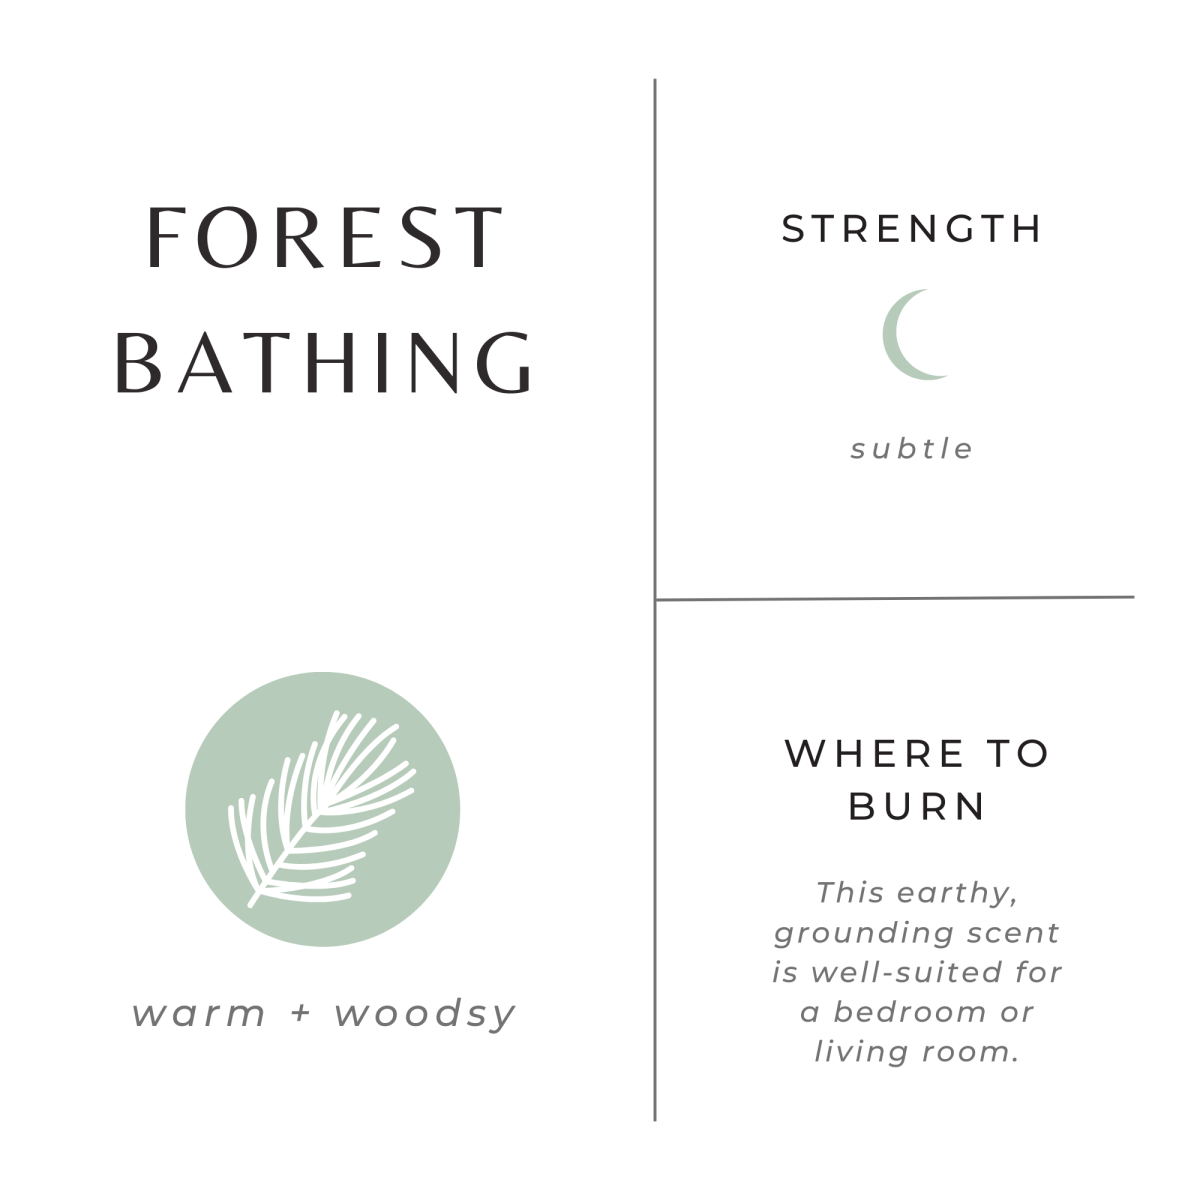 Load image into Gallery viewer, Slow North Forest Bathing | Fir + Pine + Patchouli | Frosted Candle, 8 oz - lily &amp;amp; onyx
